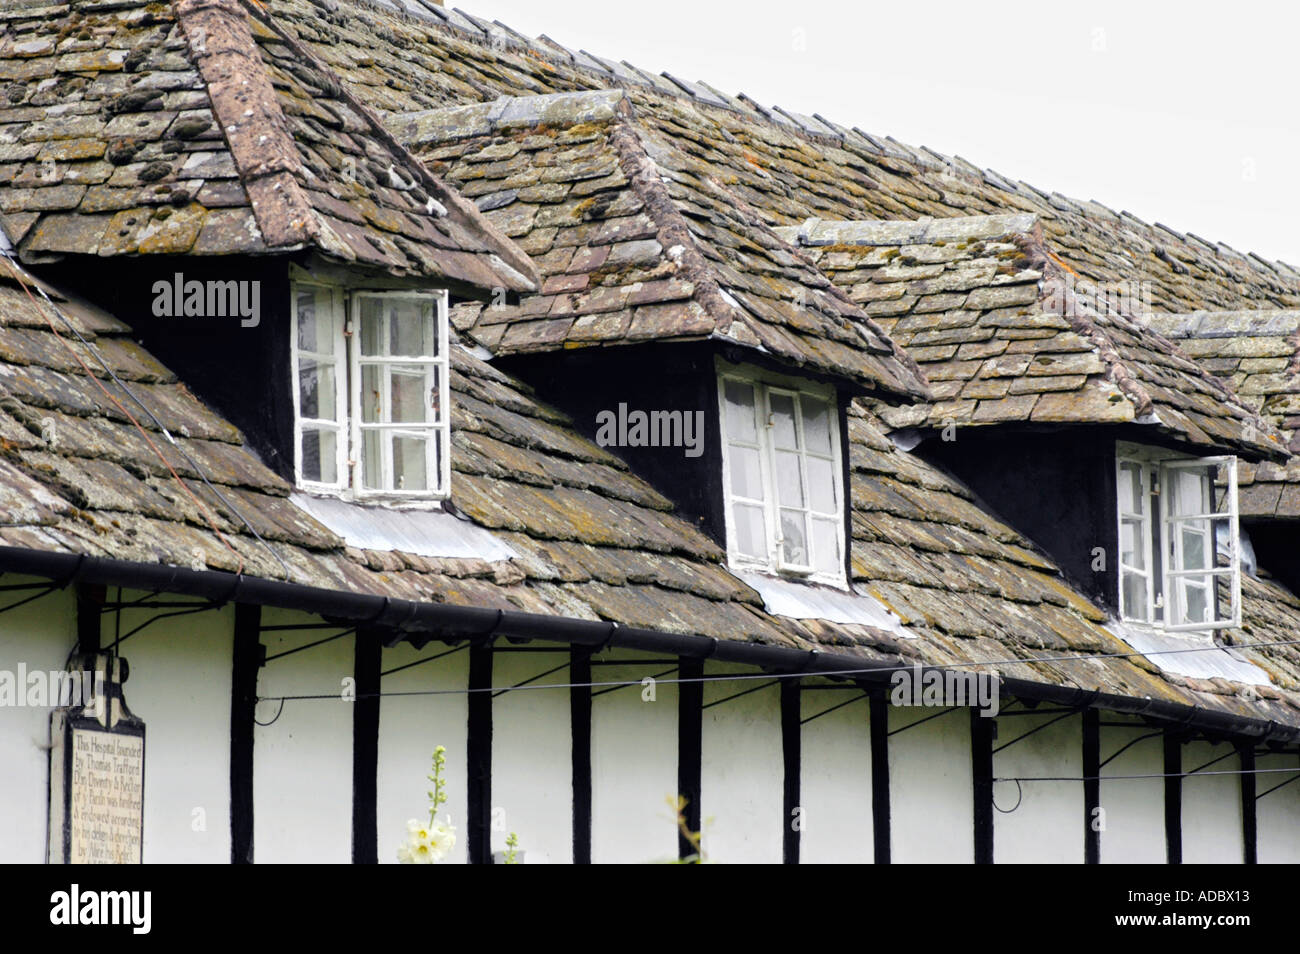 Row of black and white timber framed cottages at Pembridge Herefordshire England UK with dormer windows and stone tile roof Stock Photo